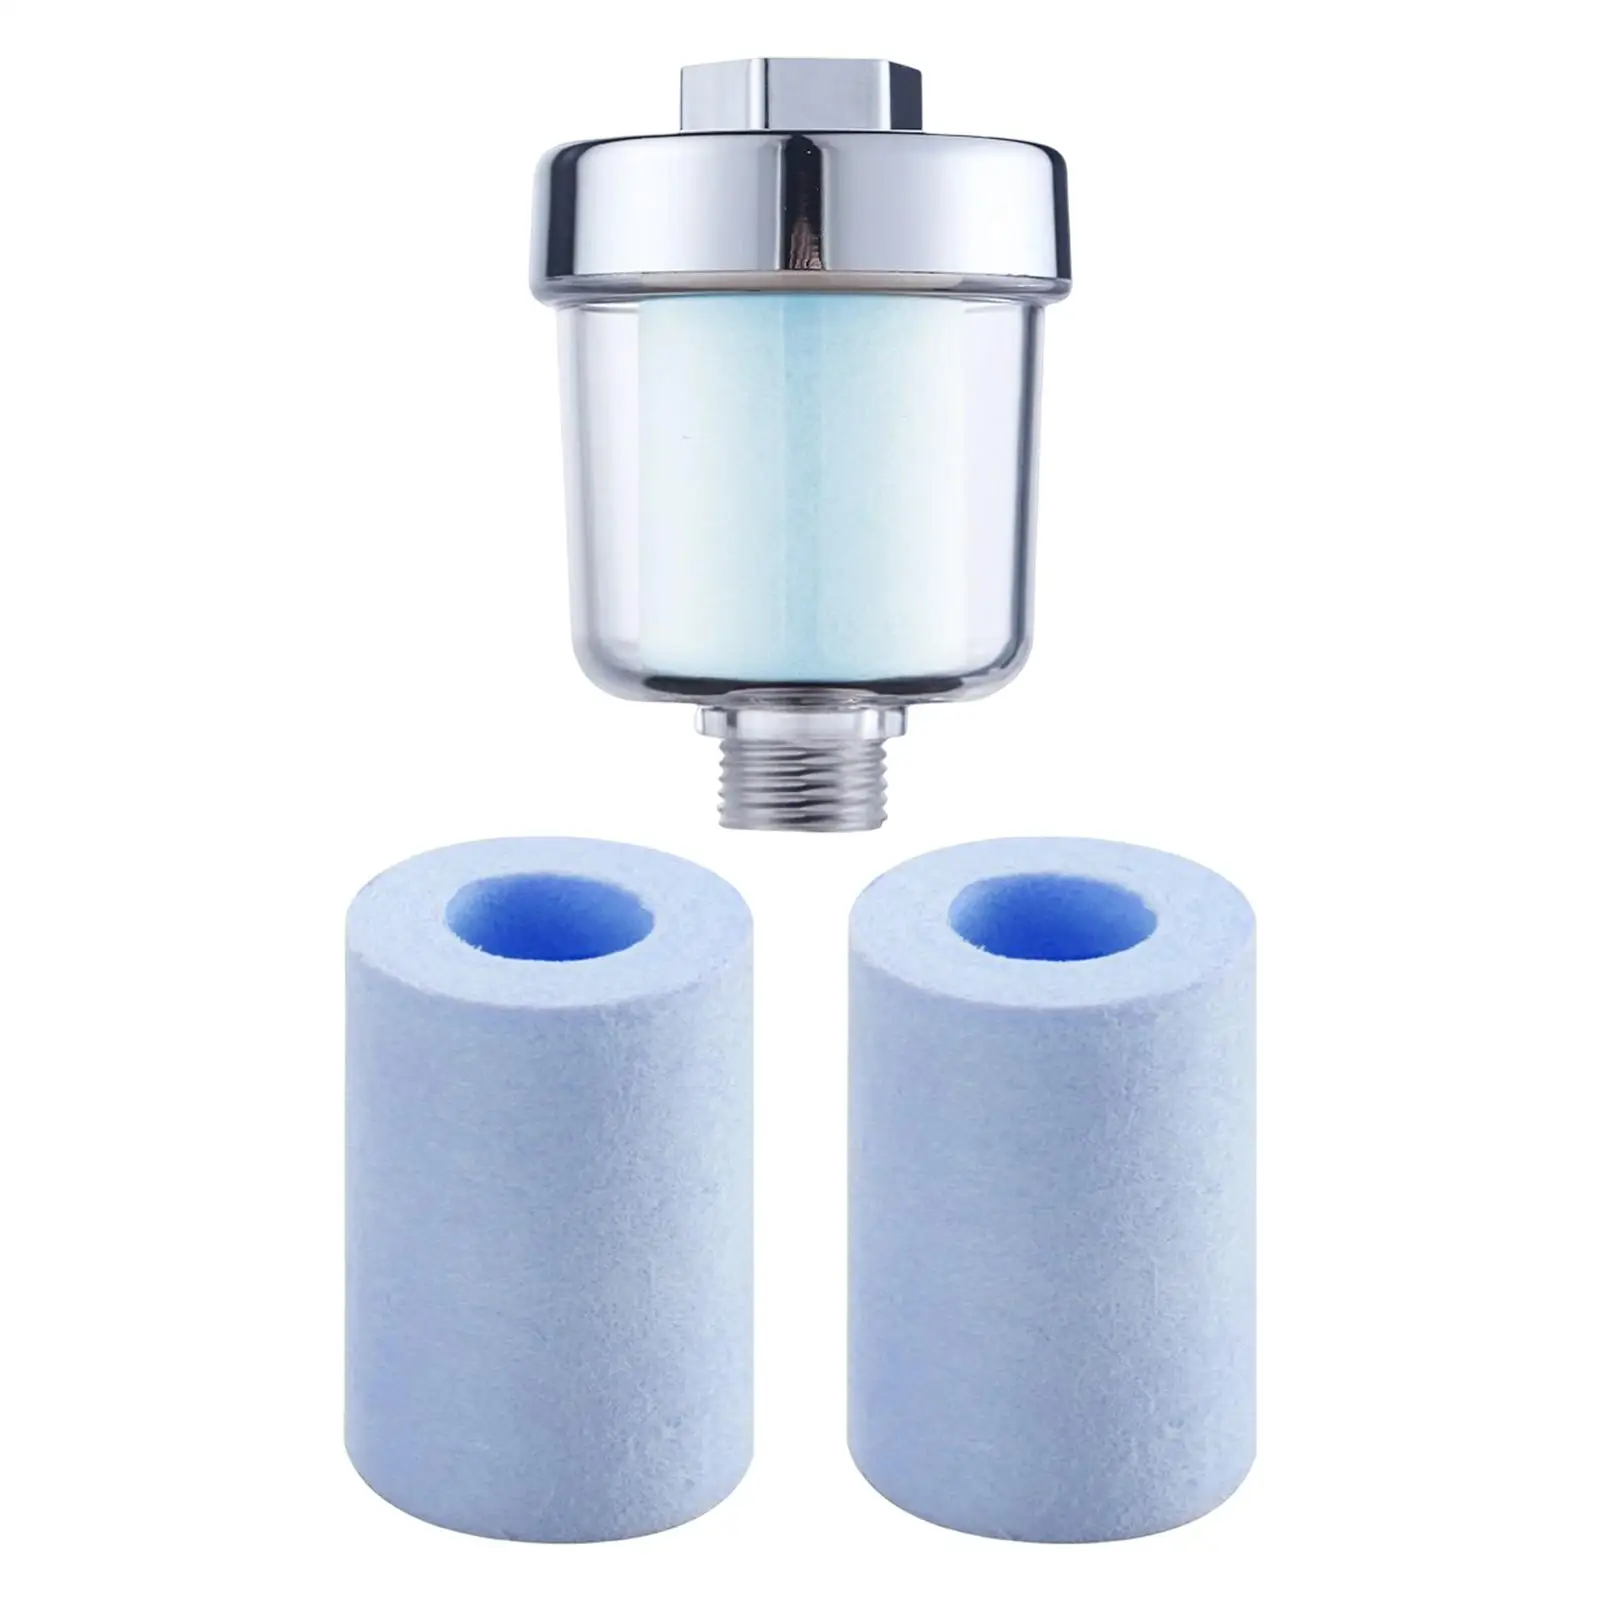 Shower Hydrant Filter Replacement Practical Transparent Durable for Bathroom